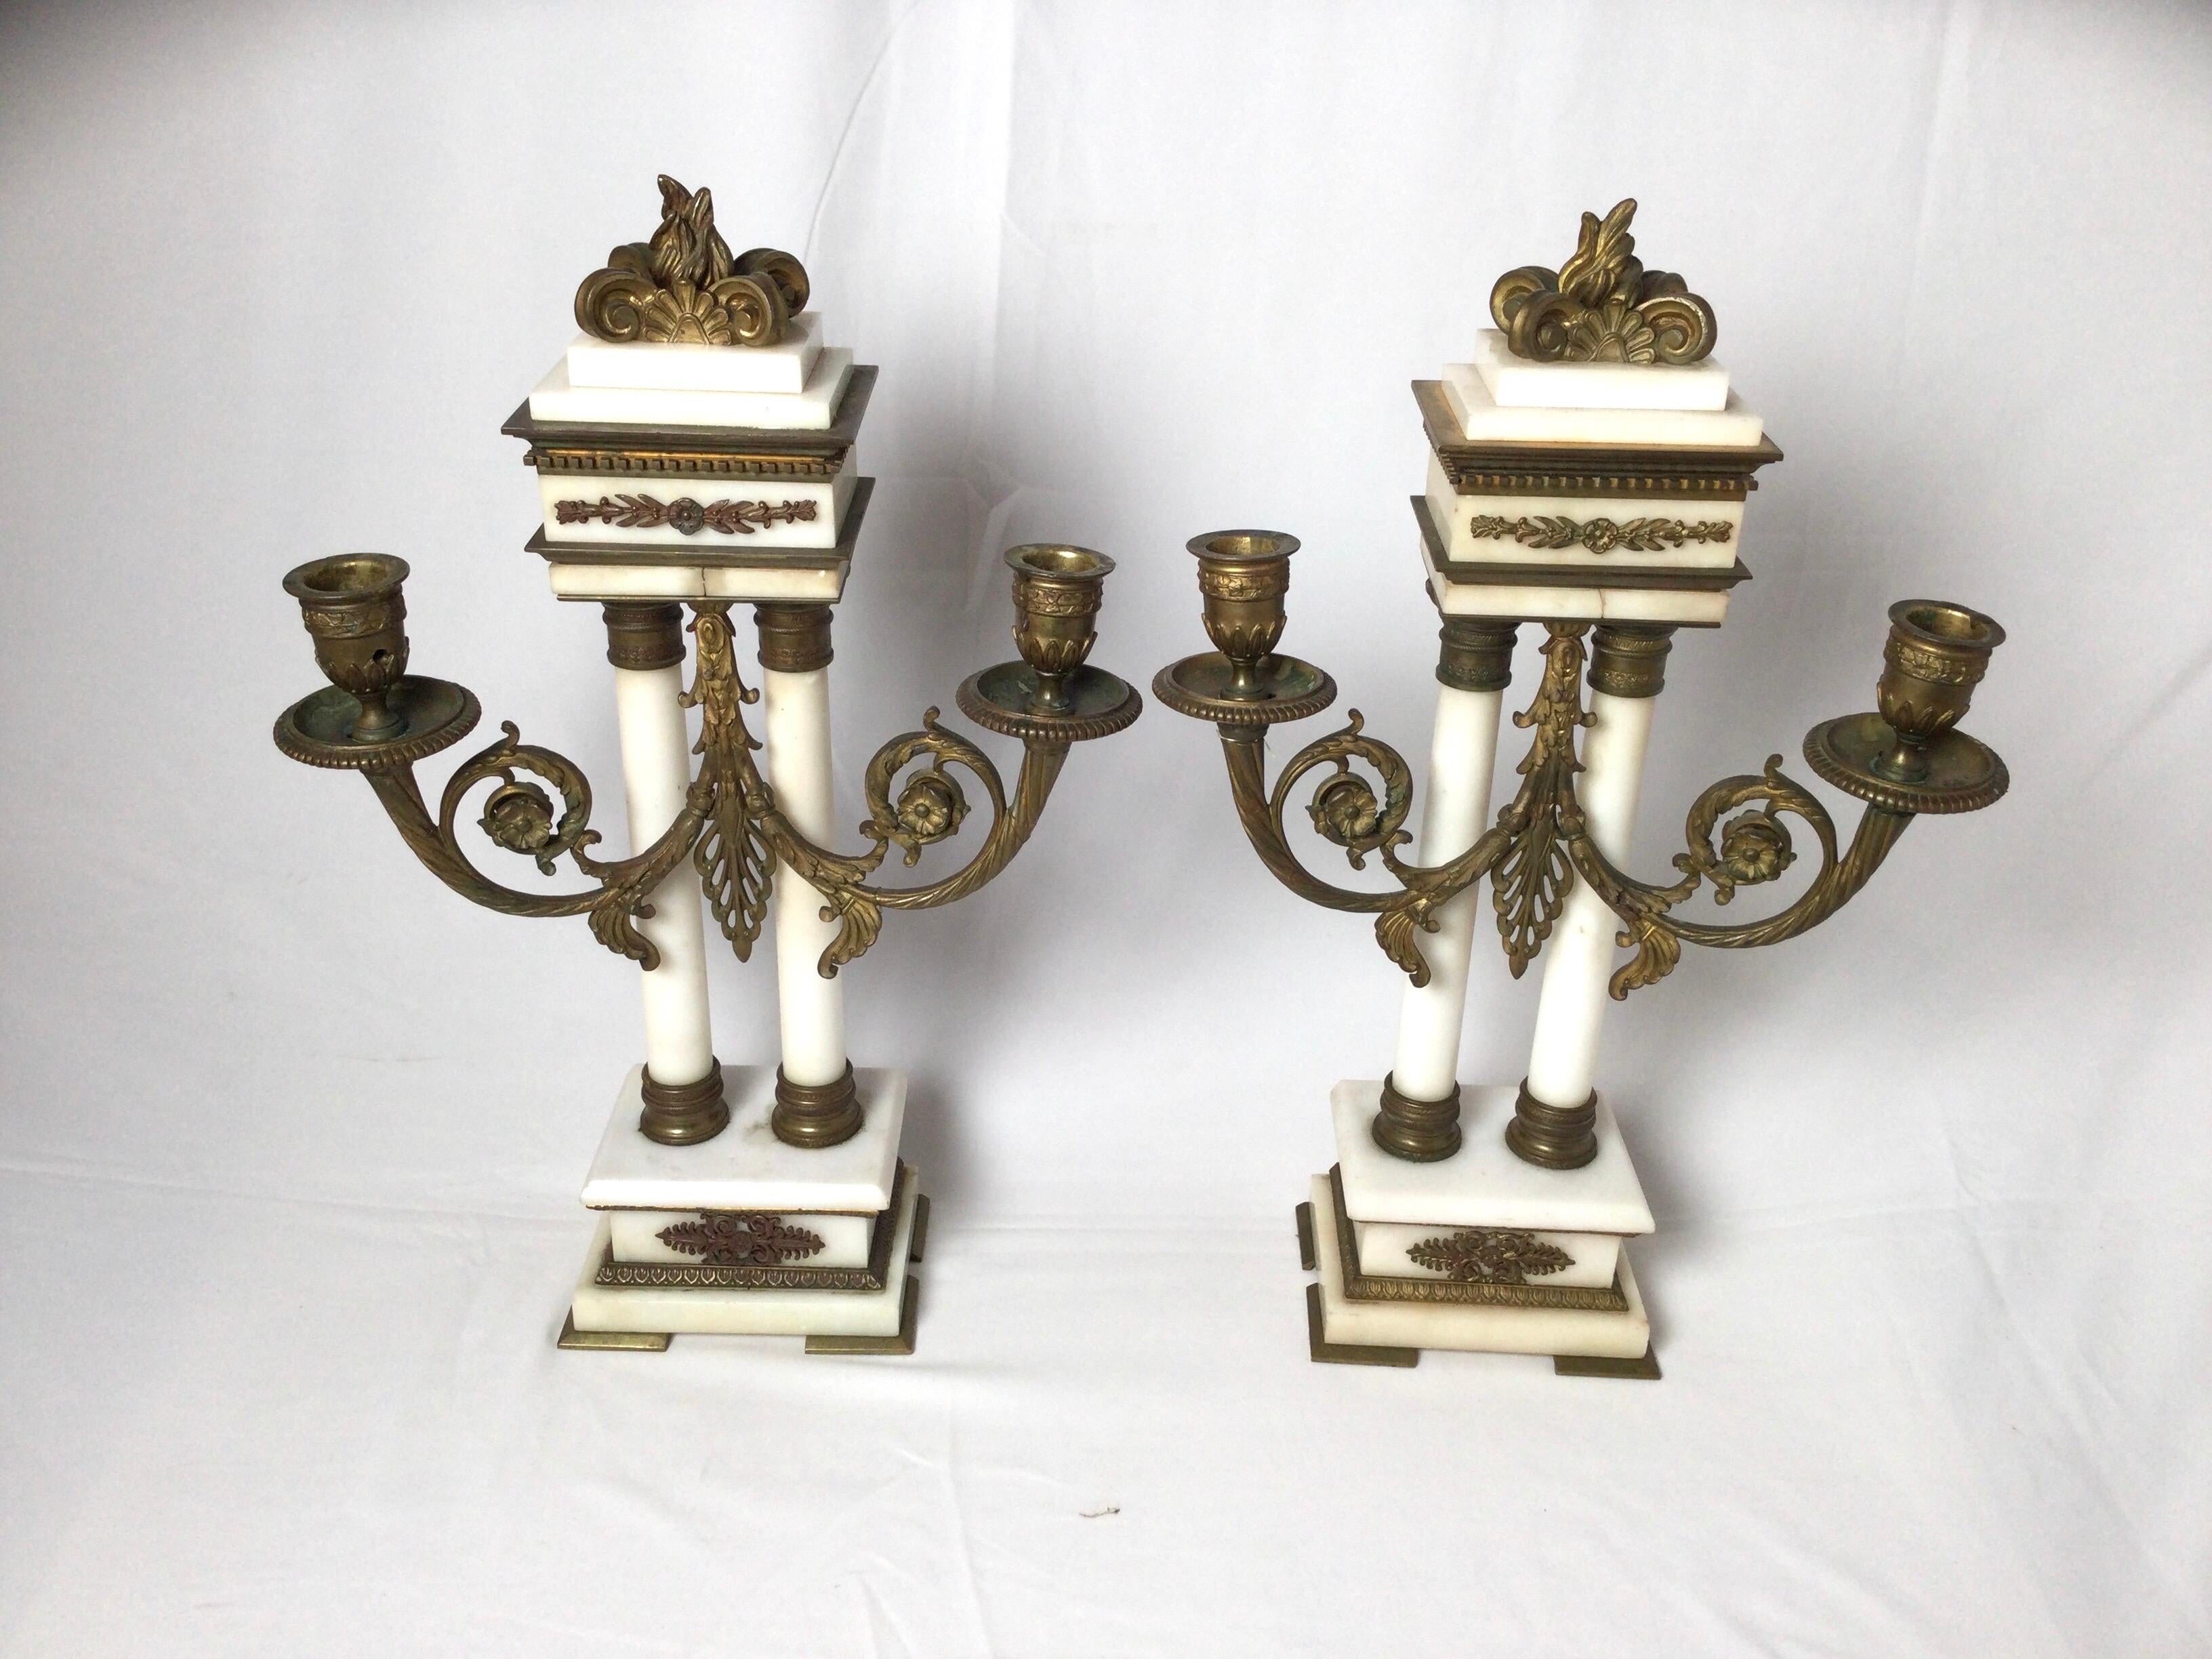 Late 19th century pair of French bronze and marble candelabras, neoclassic form with white marble columns and aged gilt bronze mounts. The fronts with scrolled arms to accommodate two candles.
Dimensions: 18